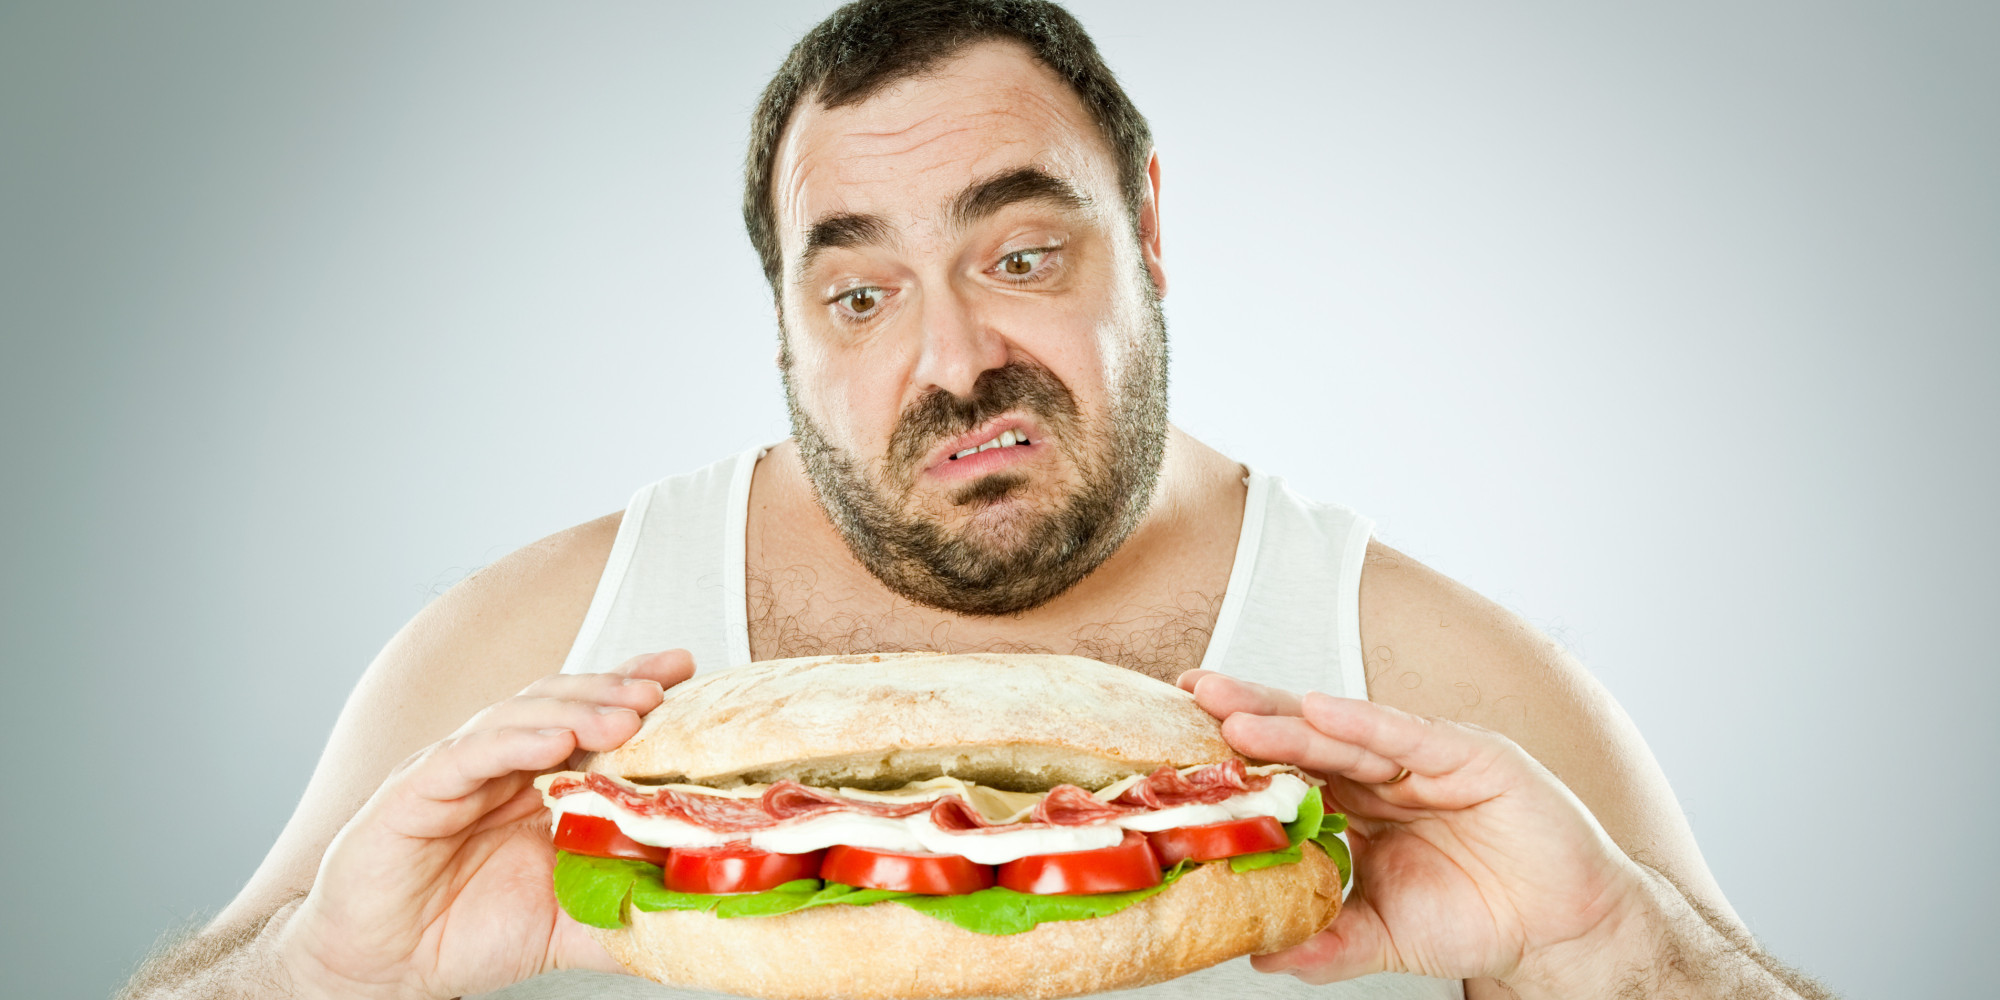 5 Simple Tricks To Avoid Overeating